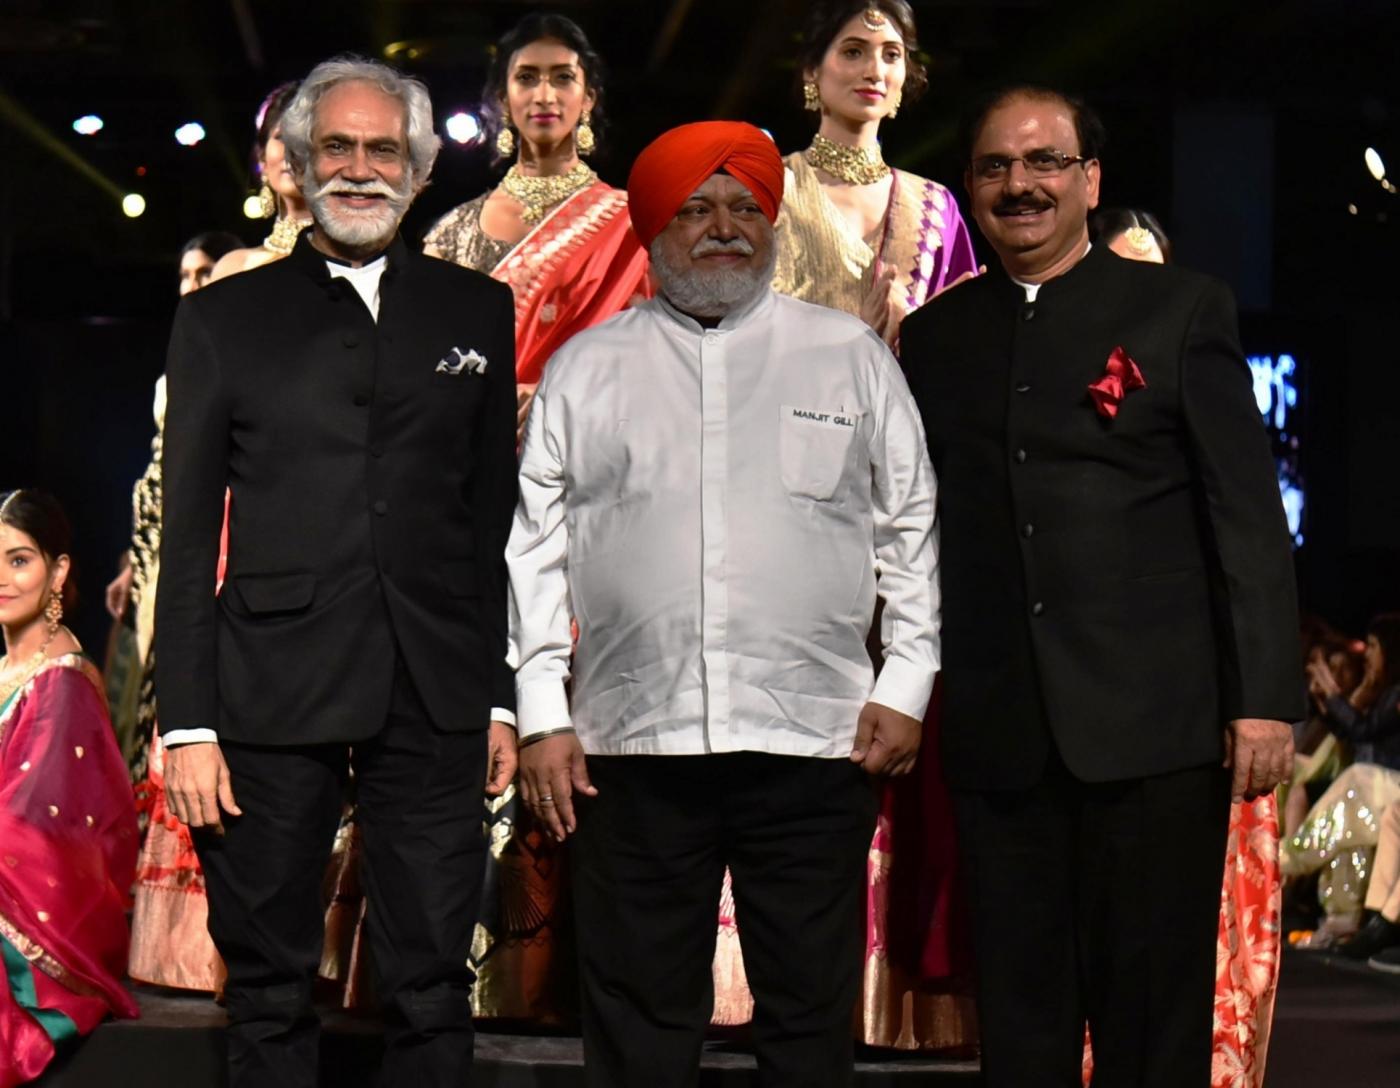 New Delhi: Chairman Steering Committee IHE 2018 & Director IEML Sunil Sethi and Chef Manjit Gill President, Indian Federation of Culinary Associations at India International Hospitality Expo (IHE 2018) in New Delhi on Aug 10, 2018.(Photo: IANS) by .